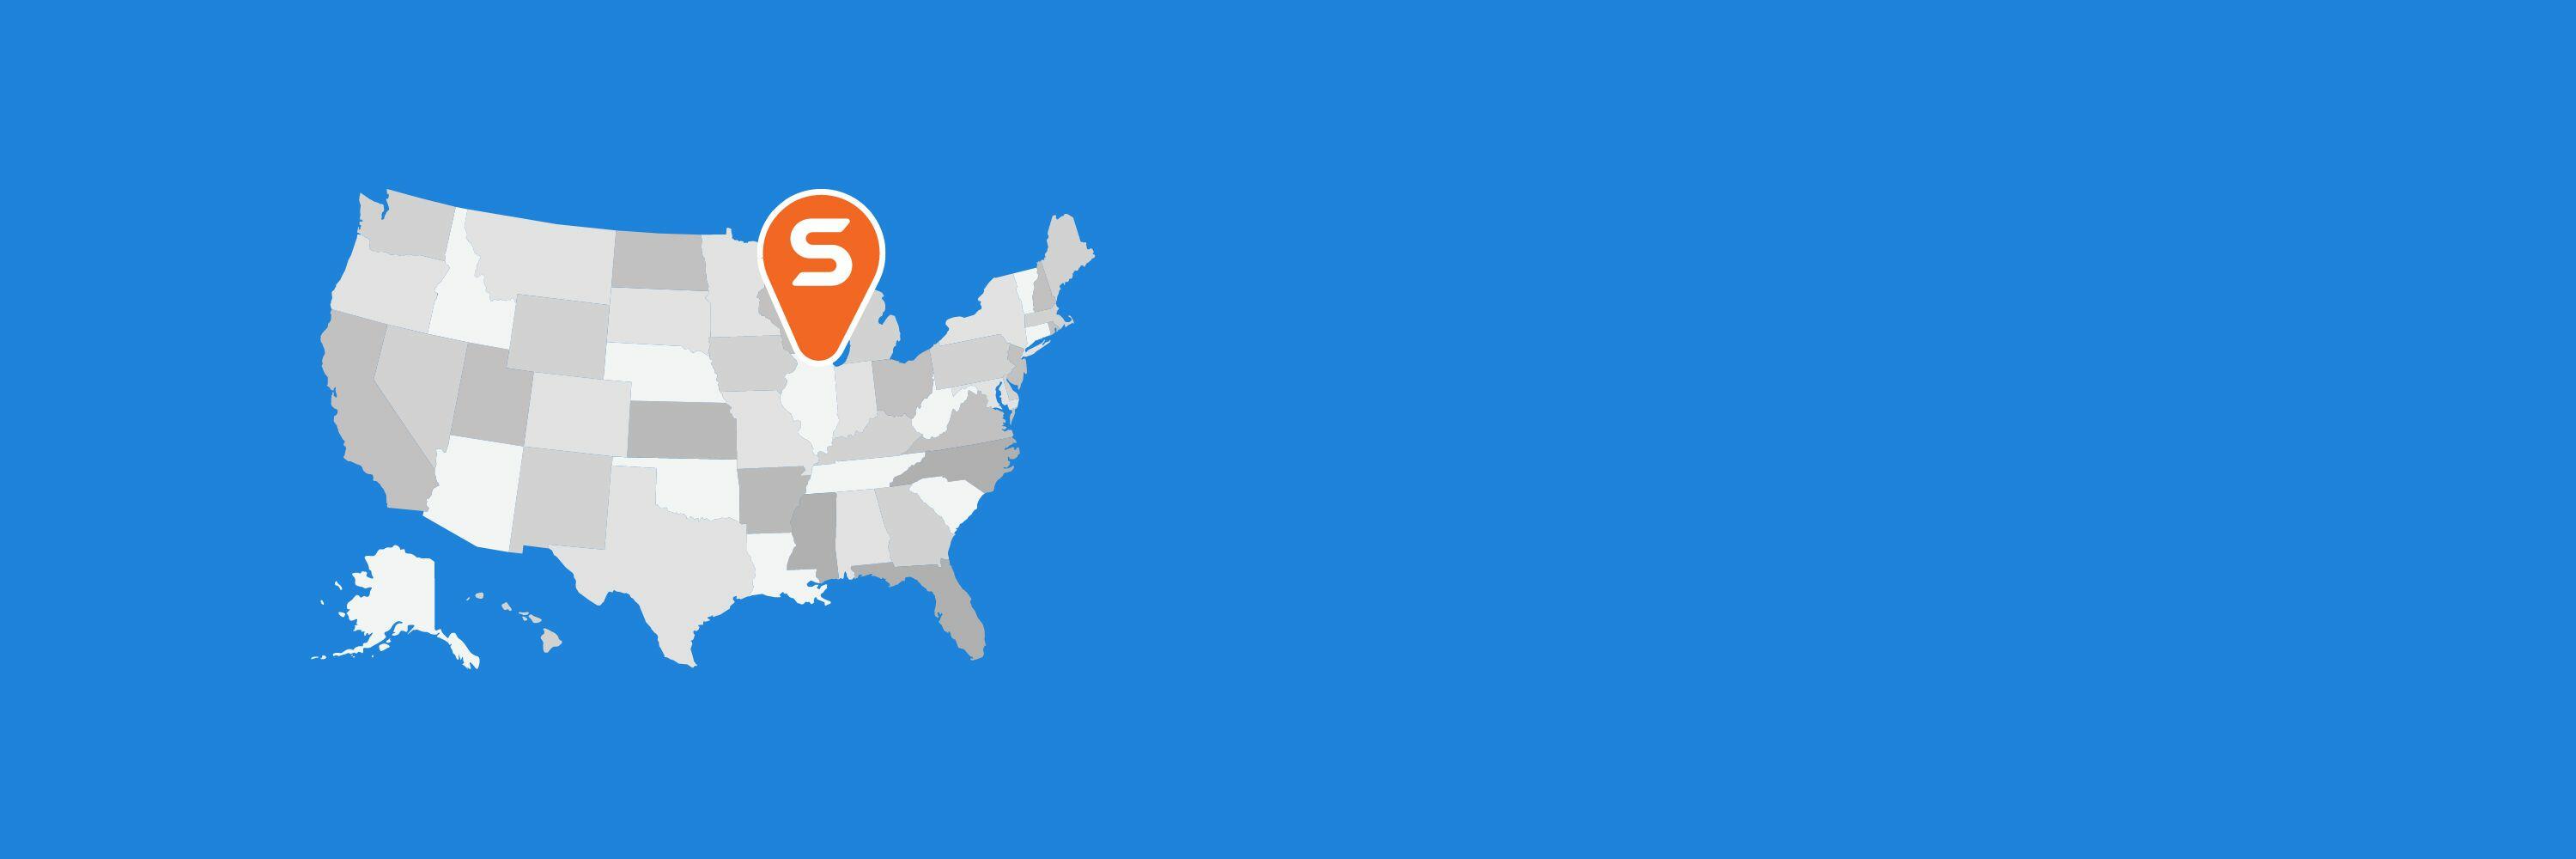 A blue background with a gray and white map of the USA featuring an orange waypoint situated over Illinois